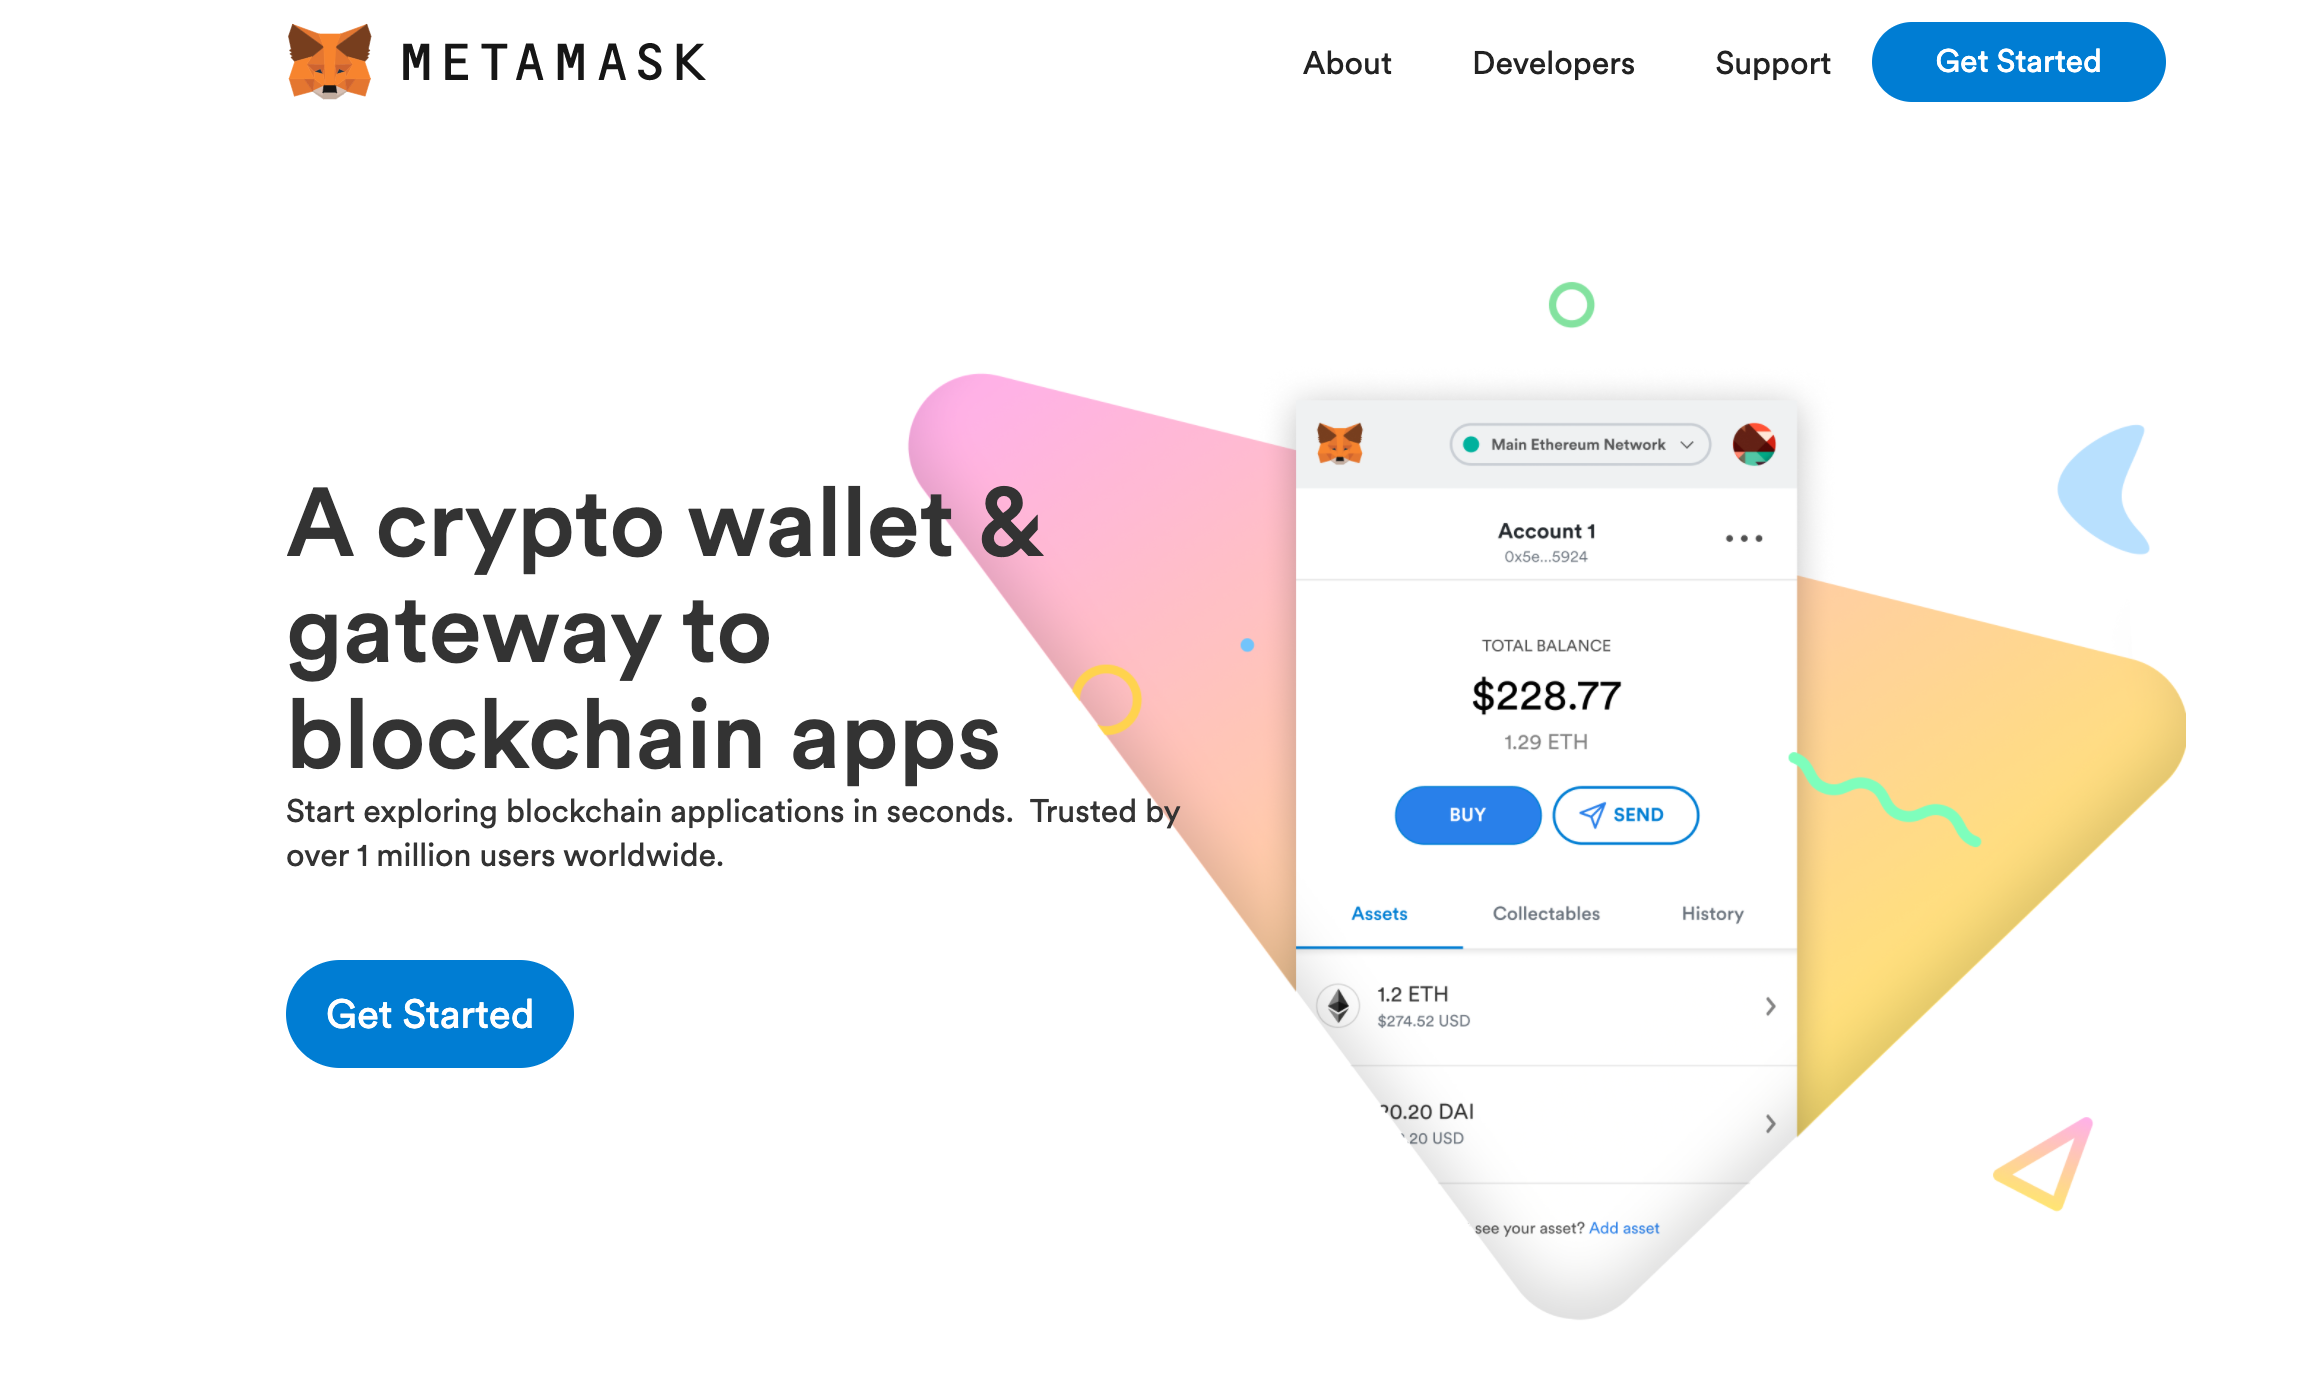 how to purchase ethereum with metamask